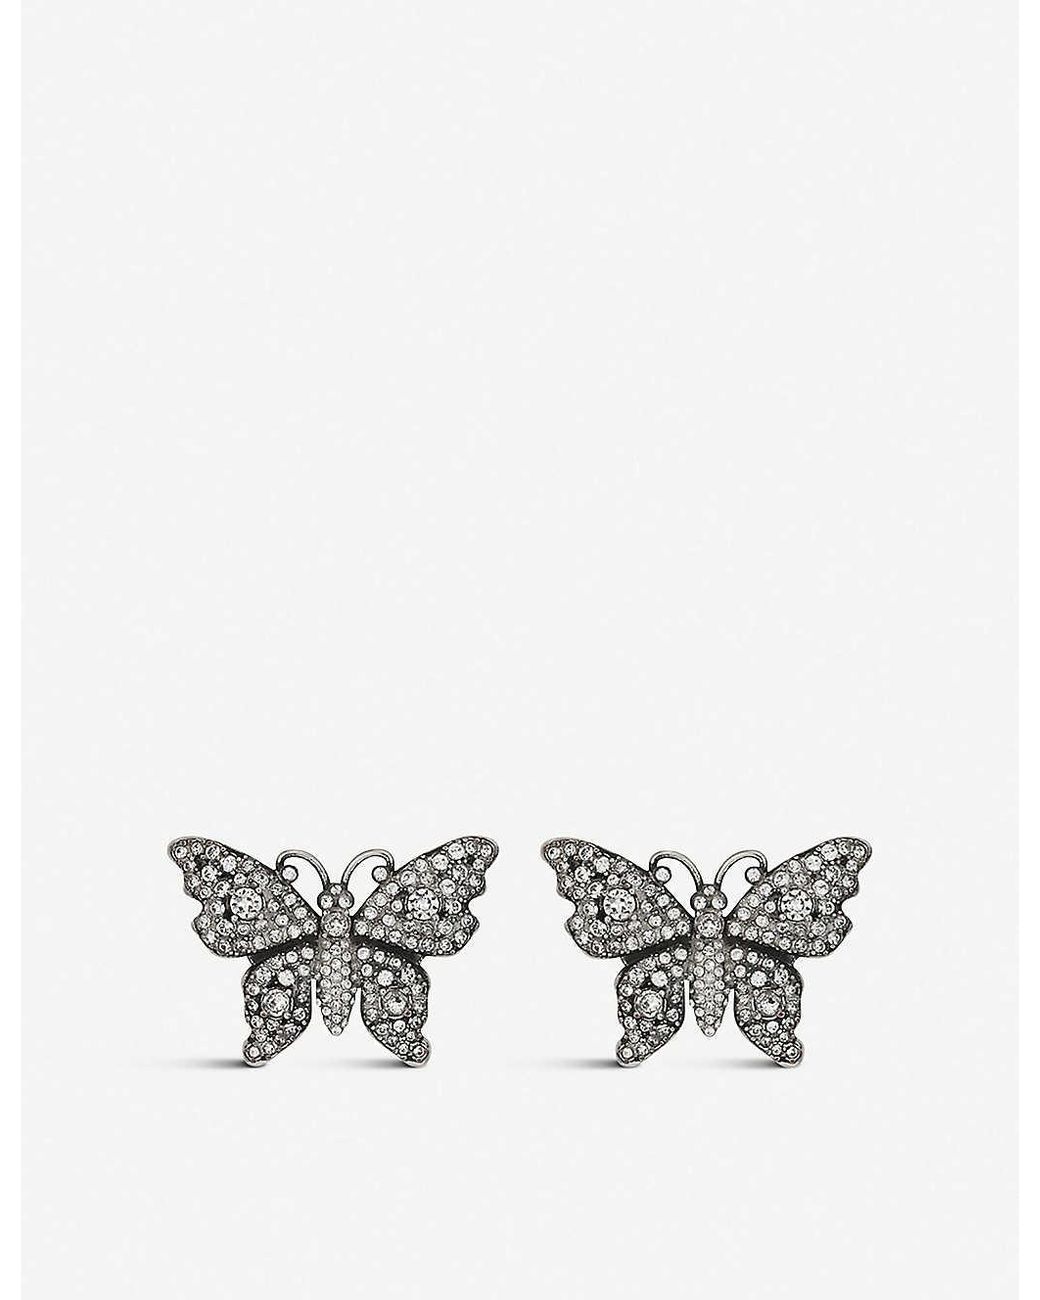 Pre-Owned Gucci GUCCI Butterfly Earrings 503919 Processing Metal Crystal  Studs Women's Unisex (Like New) - Walmart.com